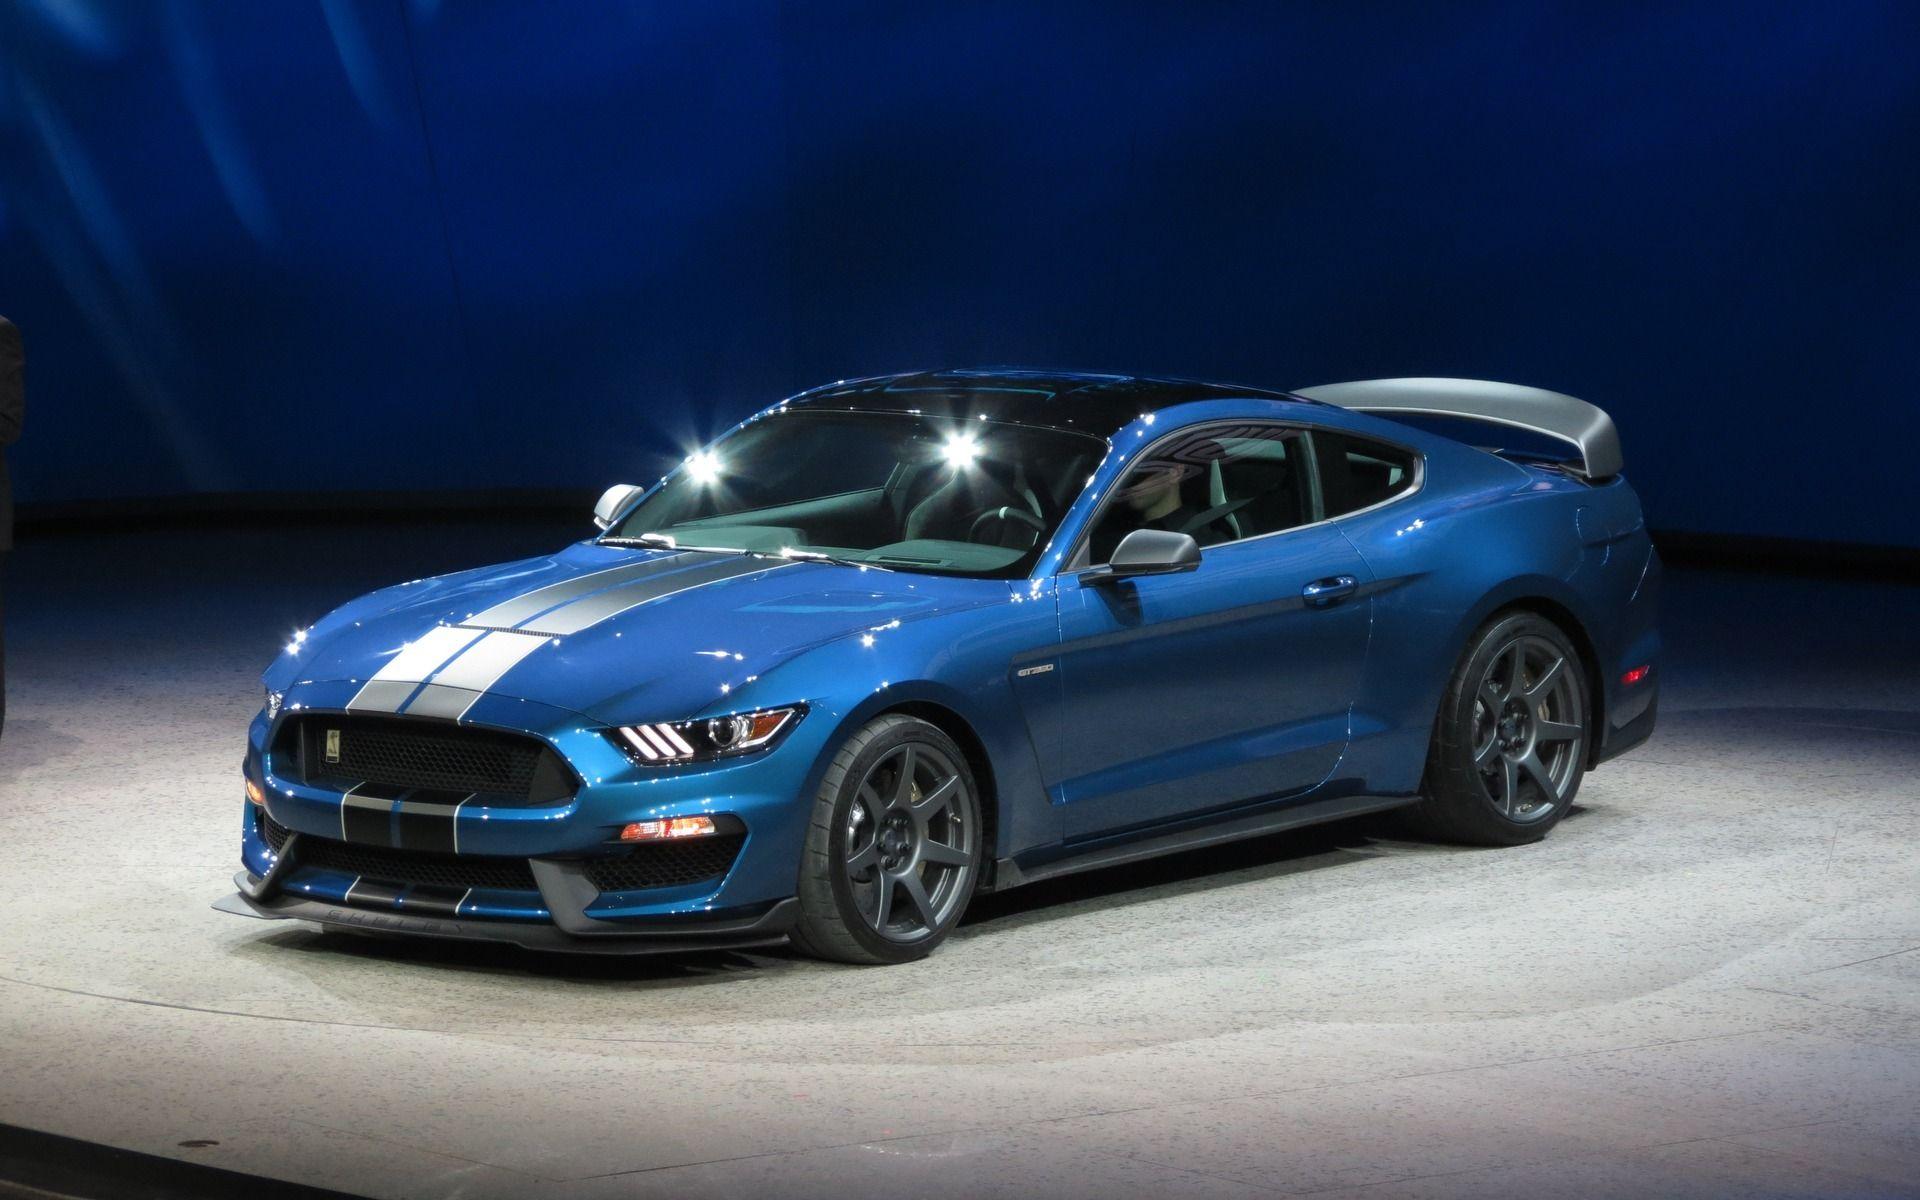 Ford Mustang Shelby GT350 Wallpaper, Top Ranked Ford Mustang